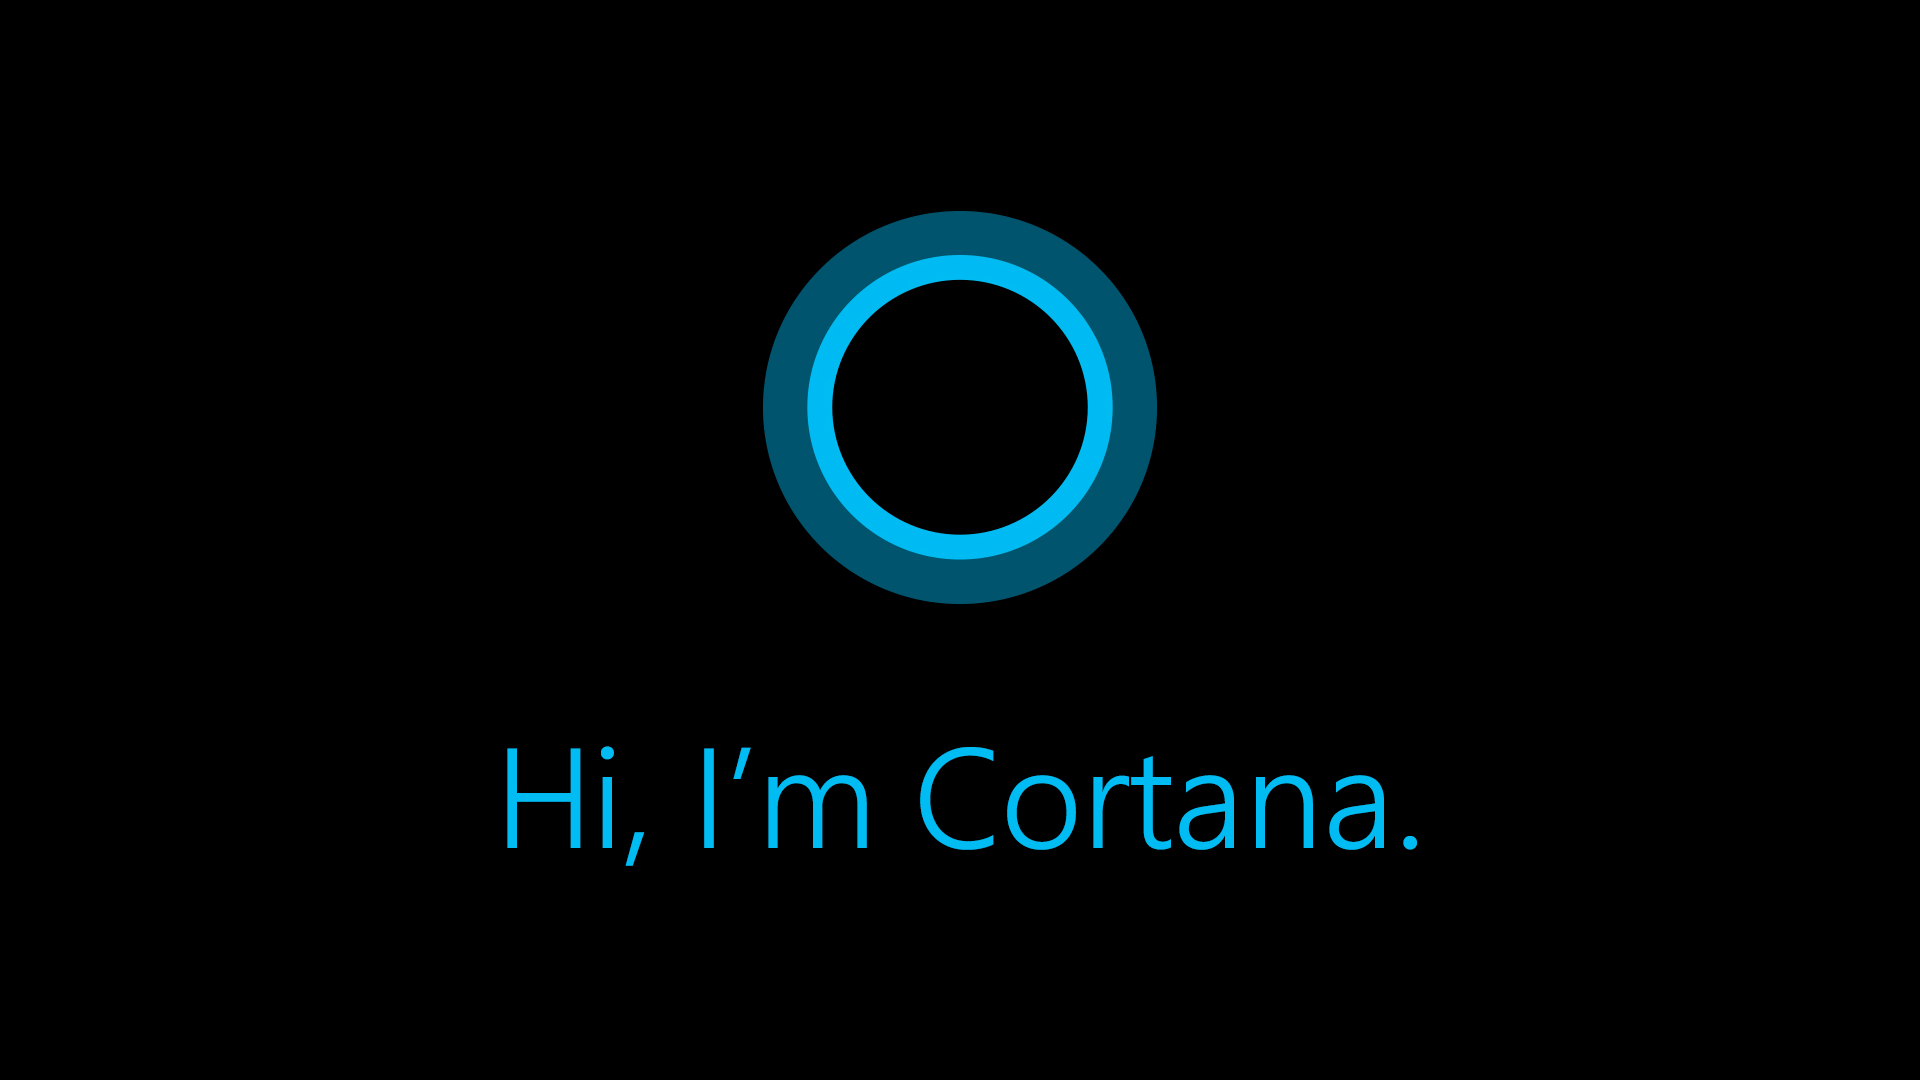 How To Quickly Remove Windows 10’s New Cortana App